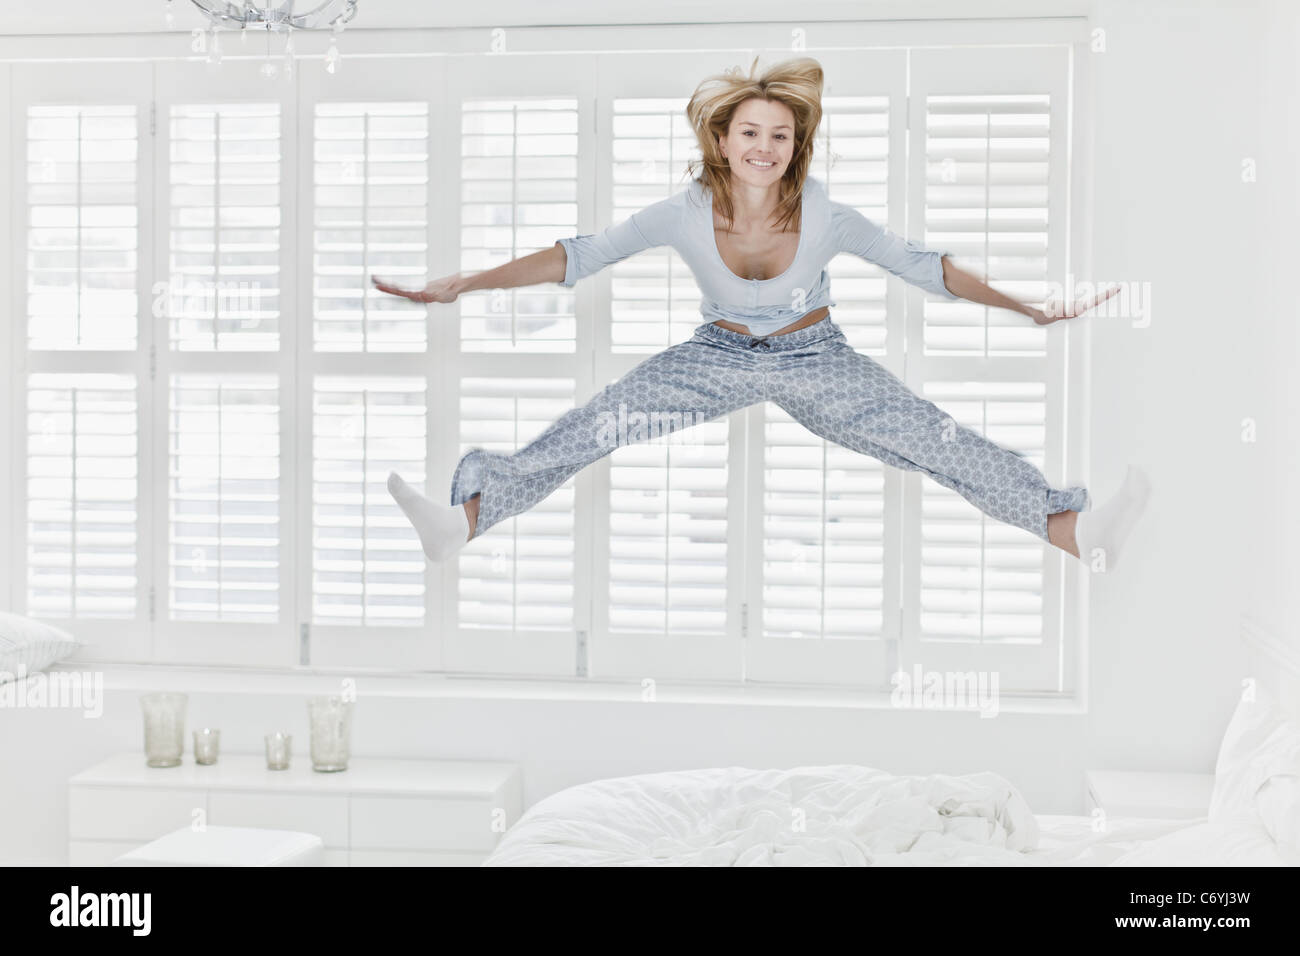 Woman jumping on bed Stock Photo